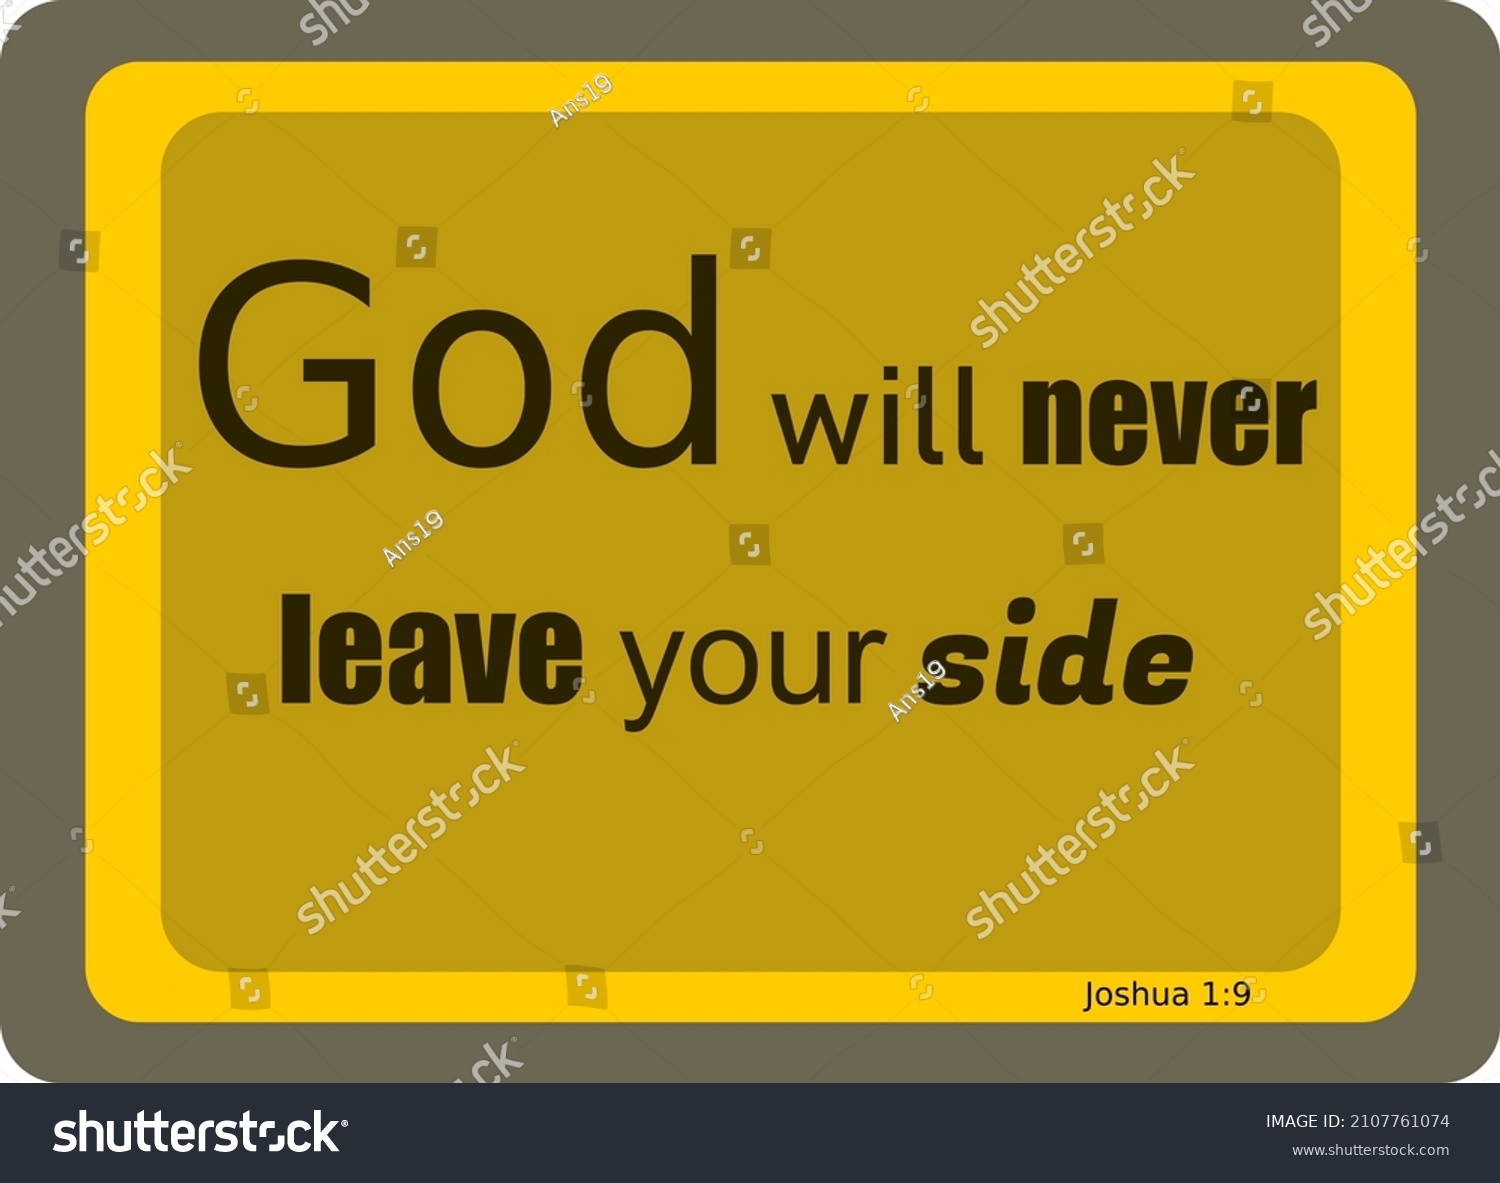 SVG of Bible text. God will never leave your side. Joshua 1:9. Vector with text, made with colors ocher, yellow, and brown. svg